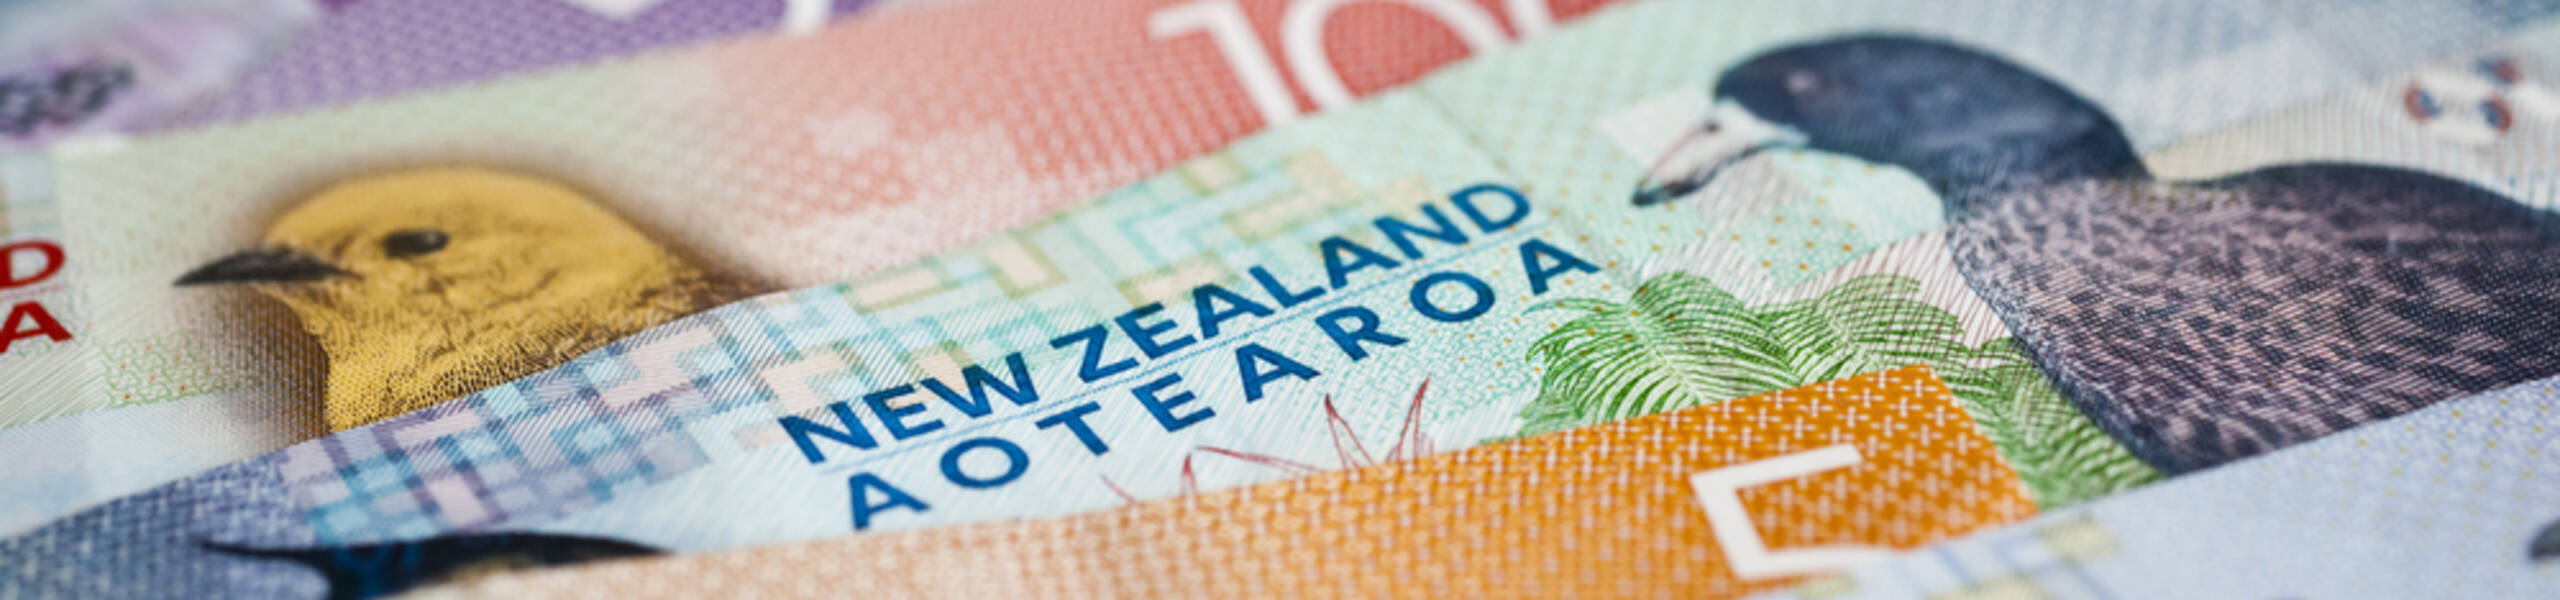 NZD/USD can recover